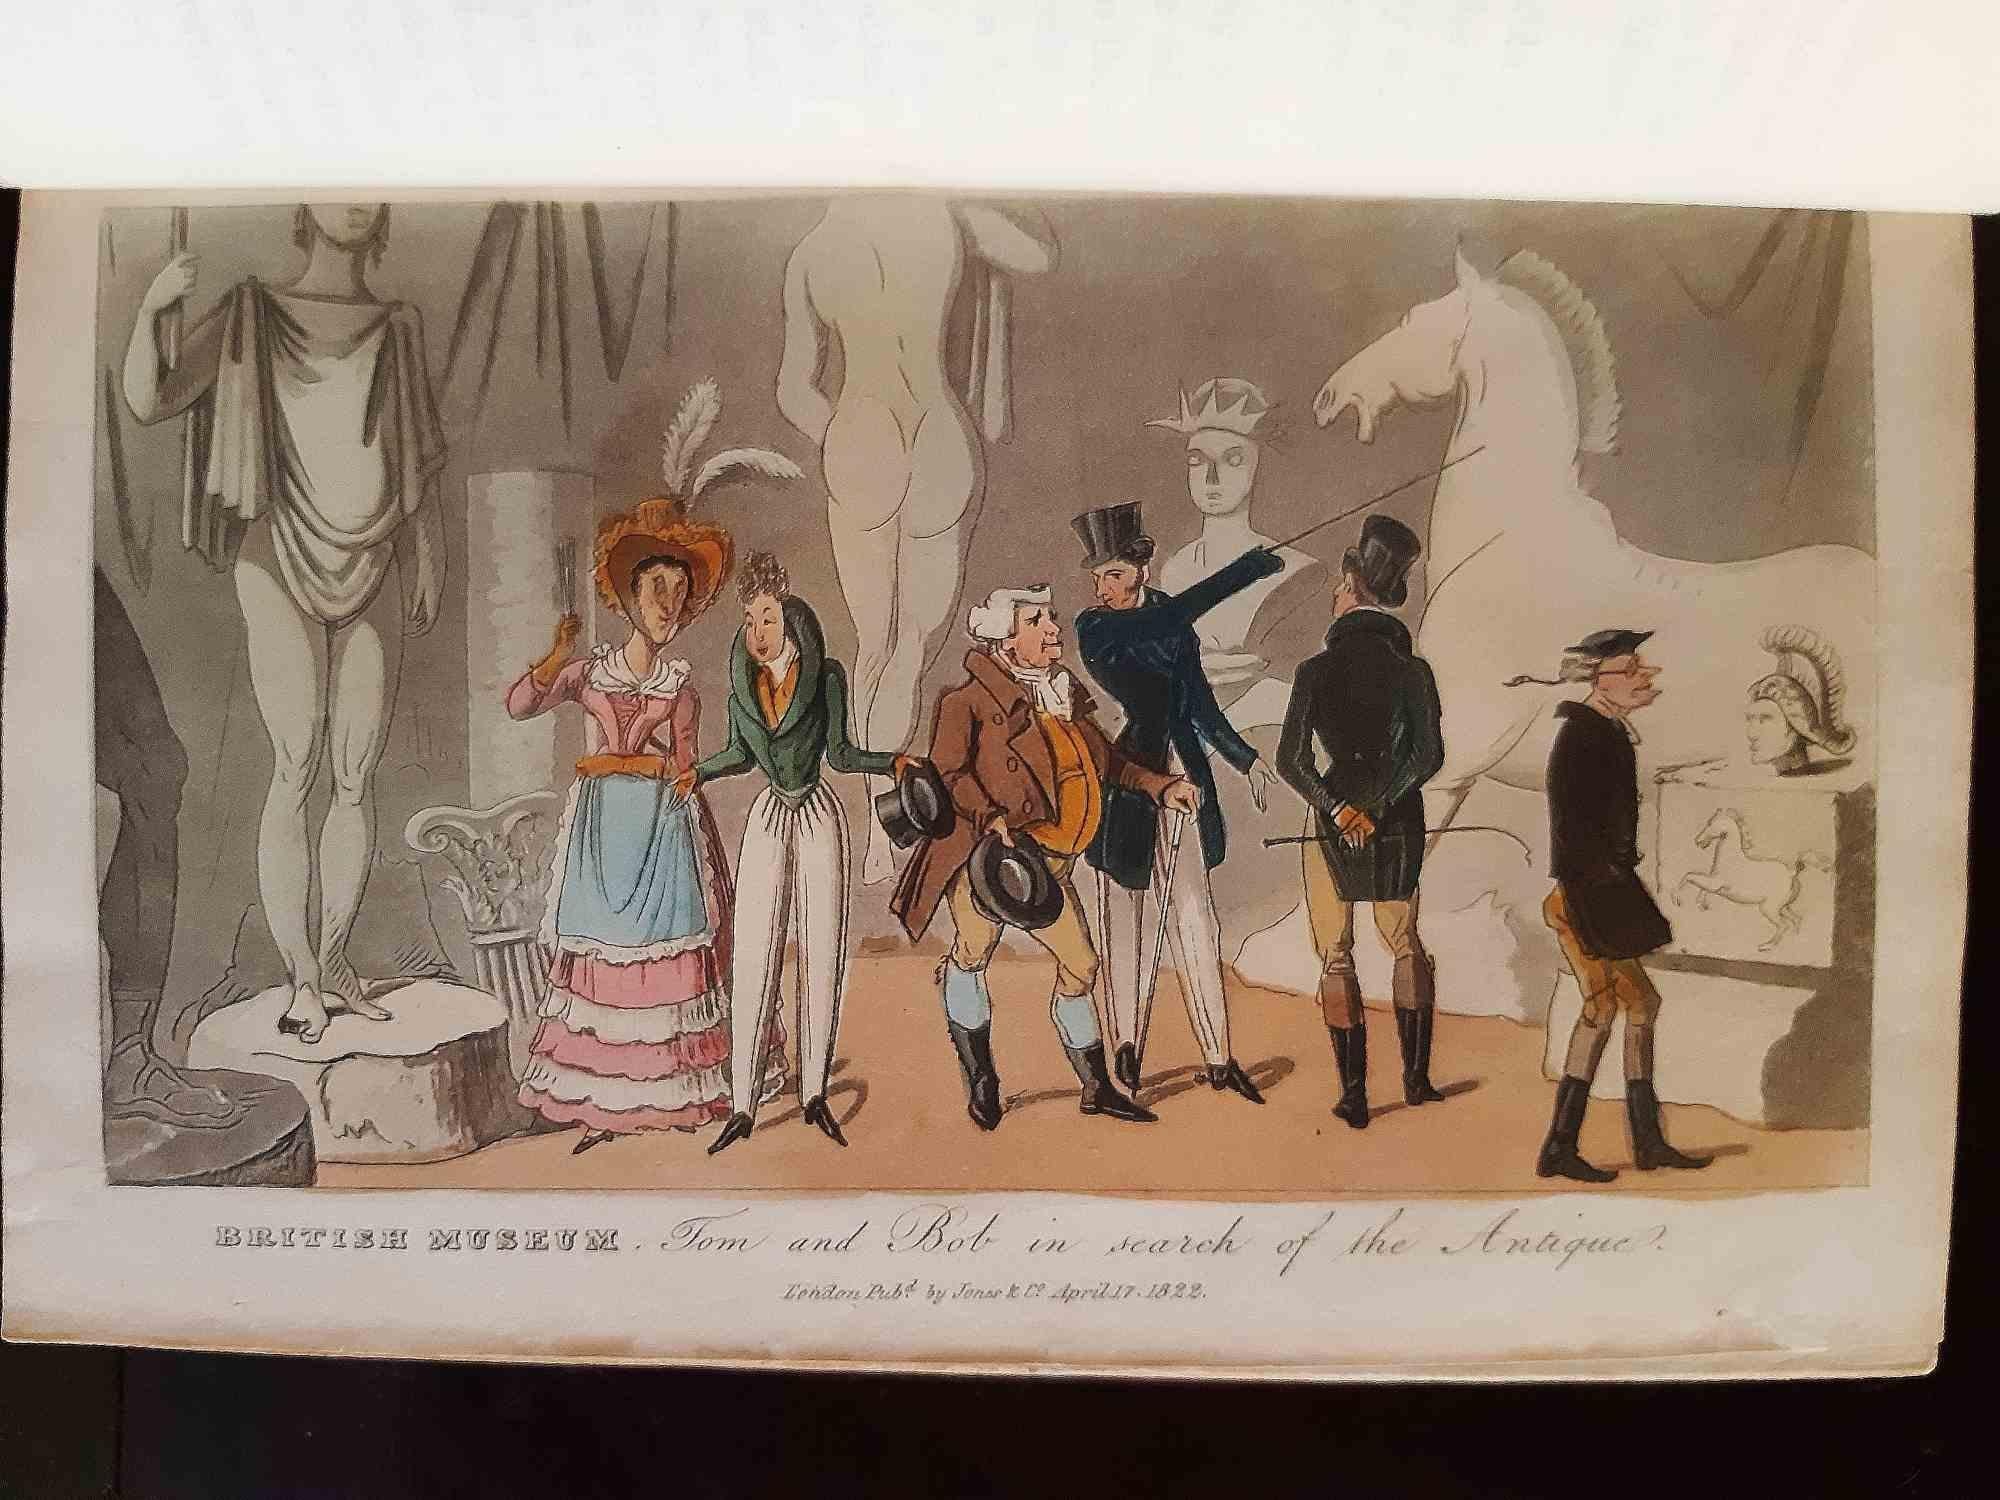 Real Life in London - Rare Book Illustrated by T. Rowlandson - 1820s